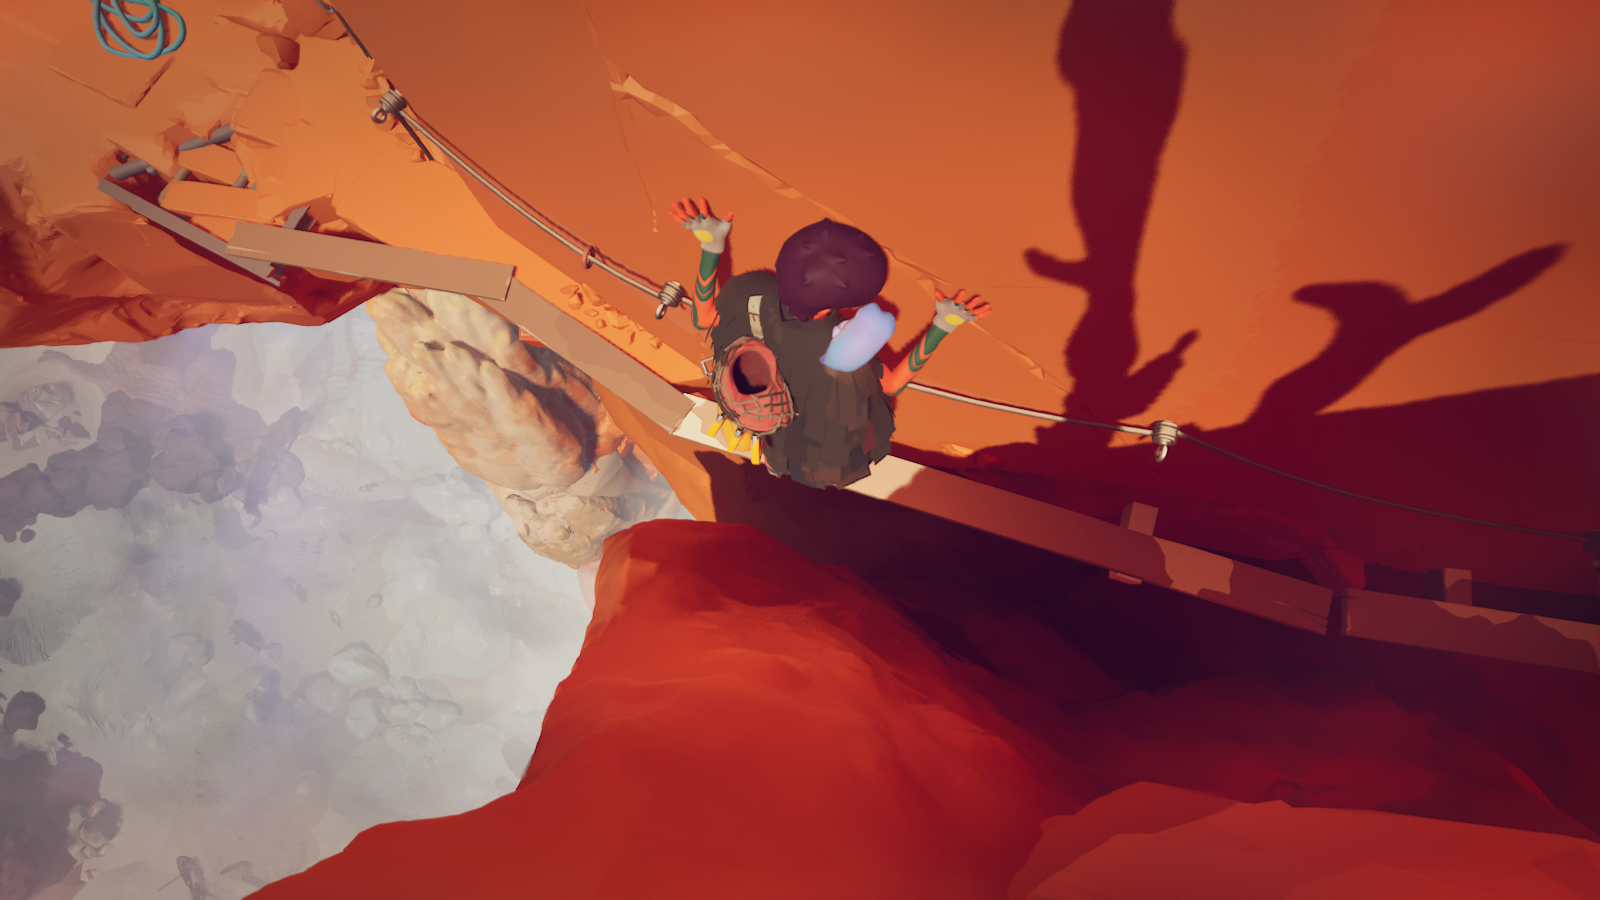 The main character in Jusant scaling a rock face on a thin beam.